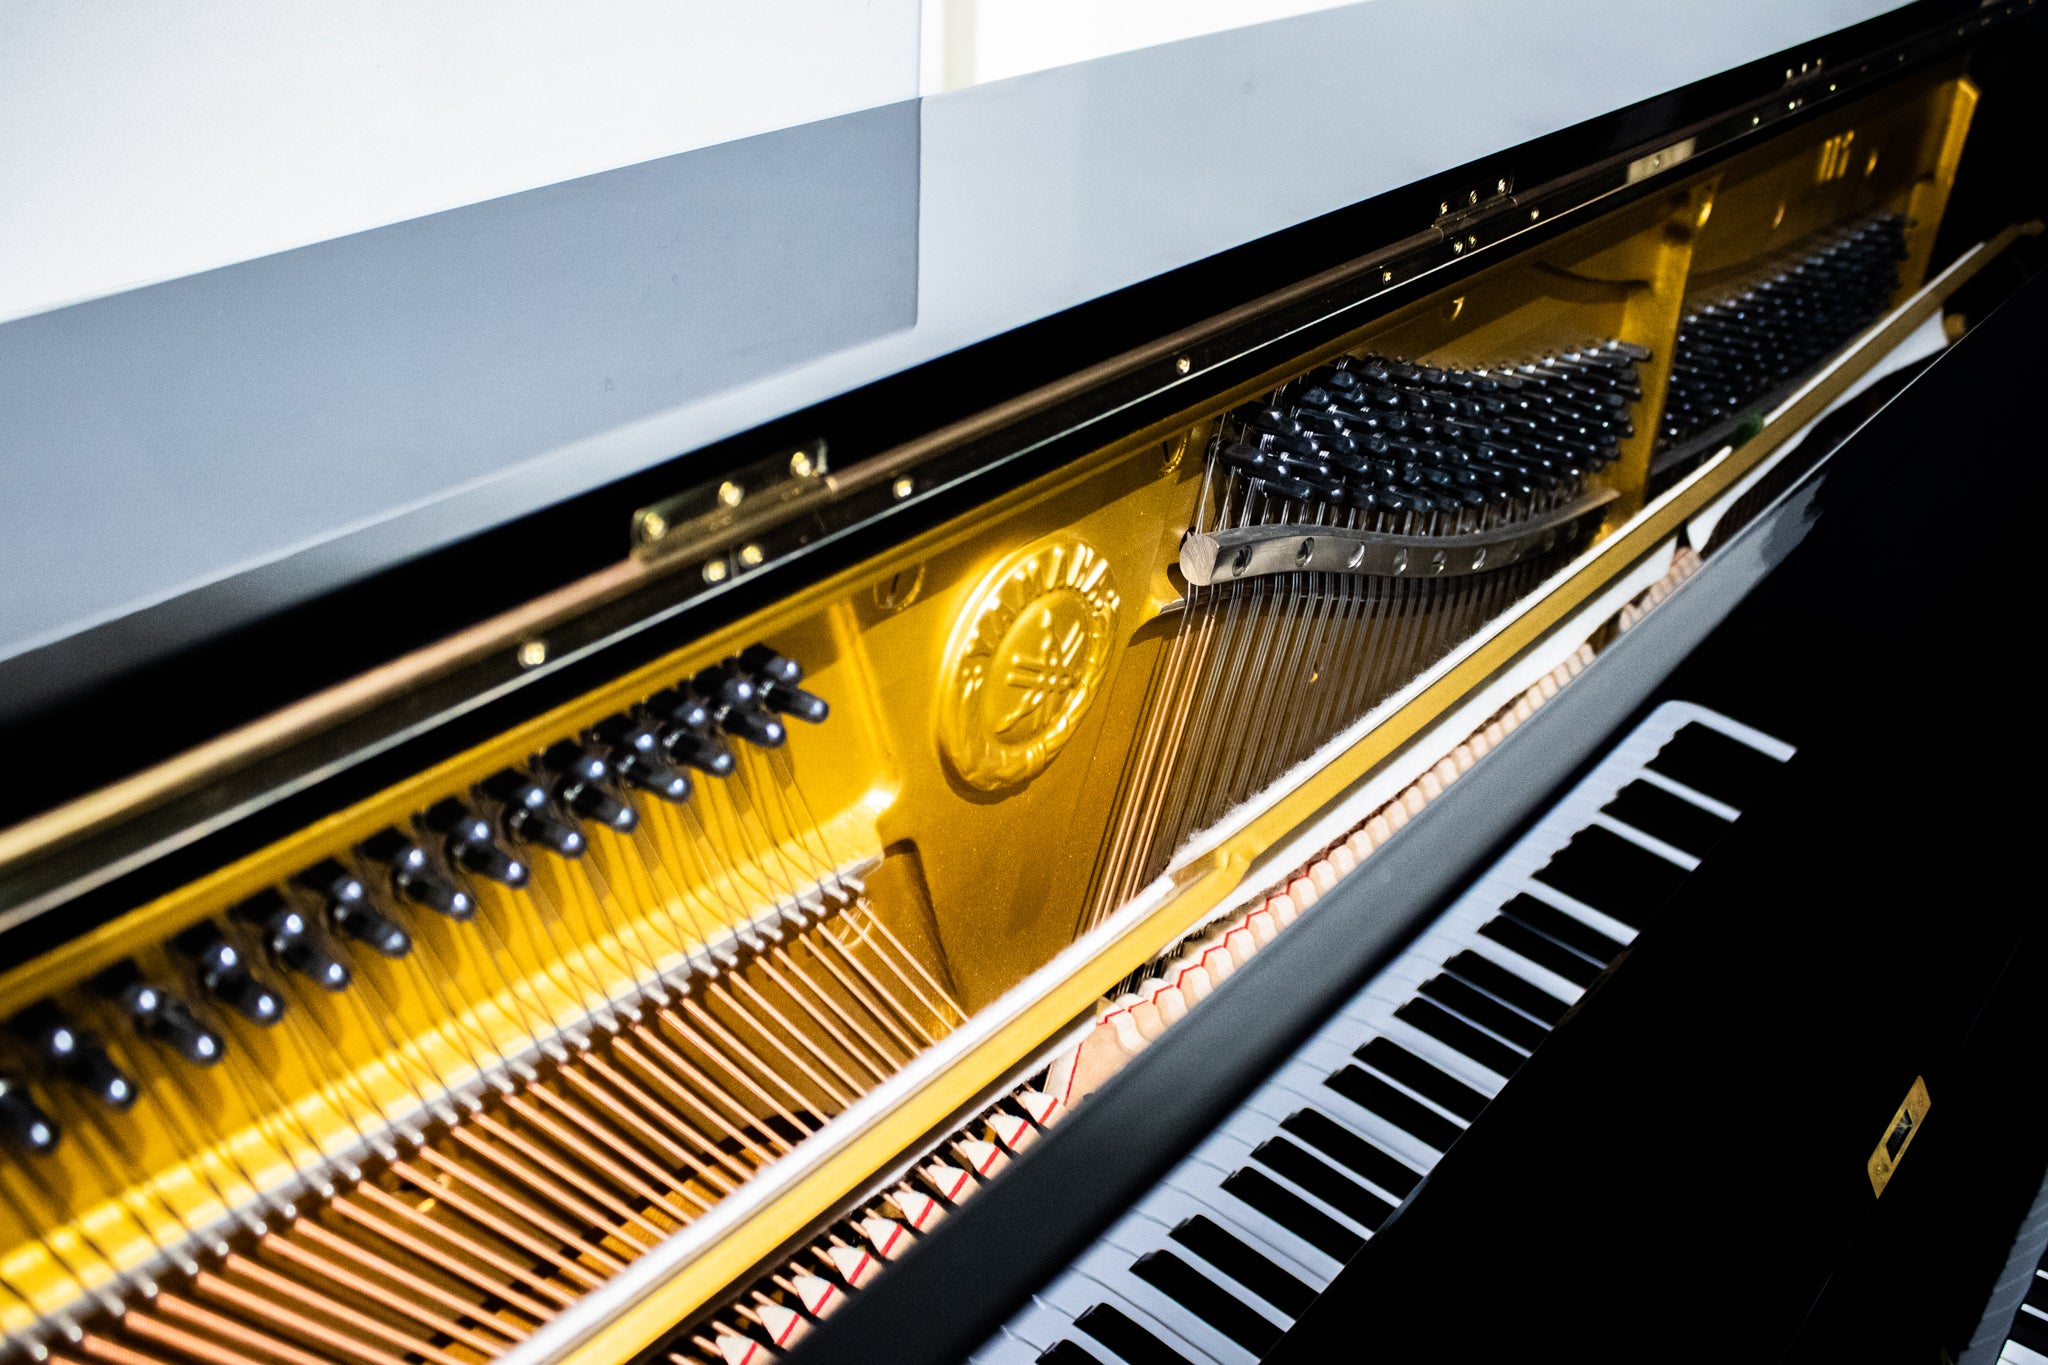 Yamaha U1 Certified Reconditioned Upright Piano (Secondhand) - Arriving Soon To Our Showroom!